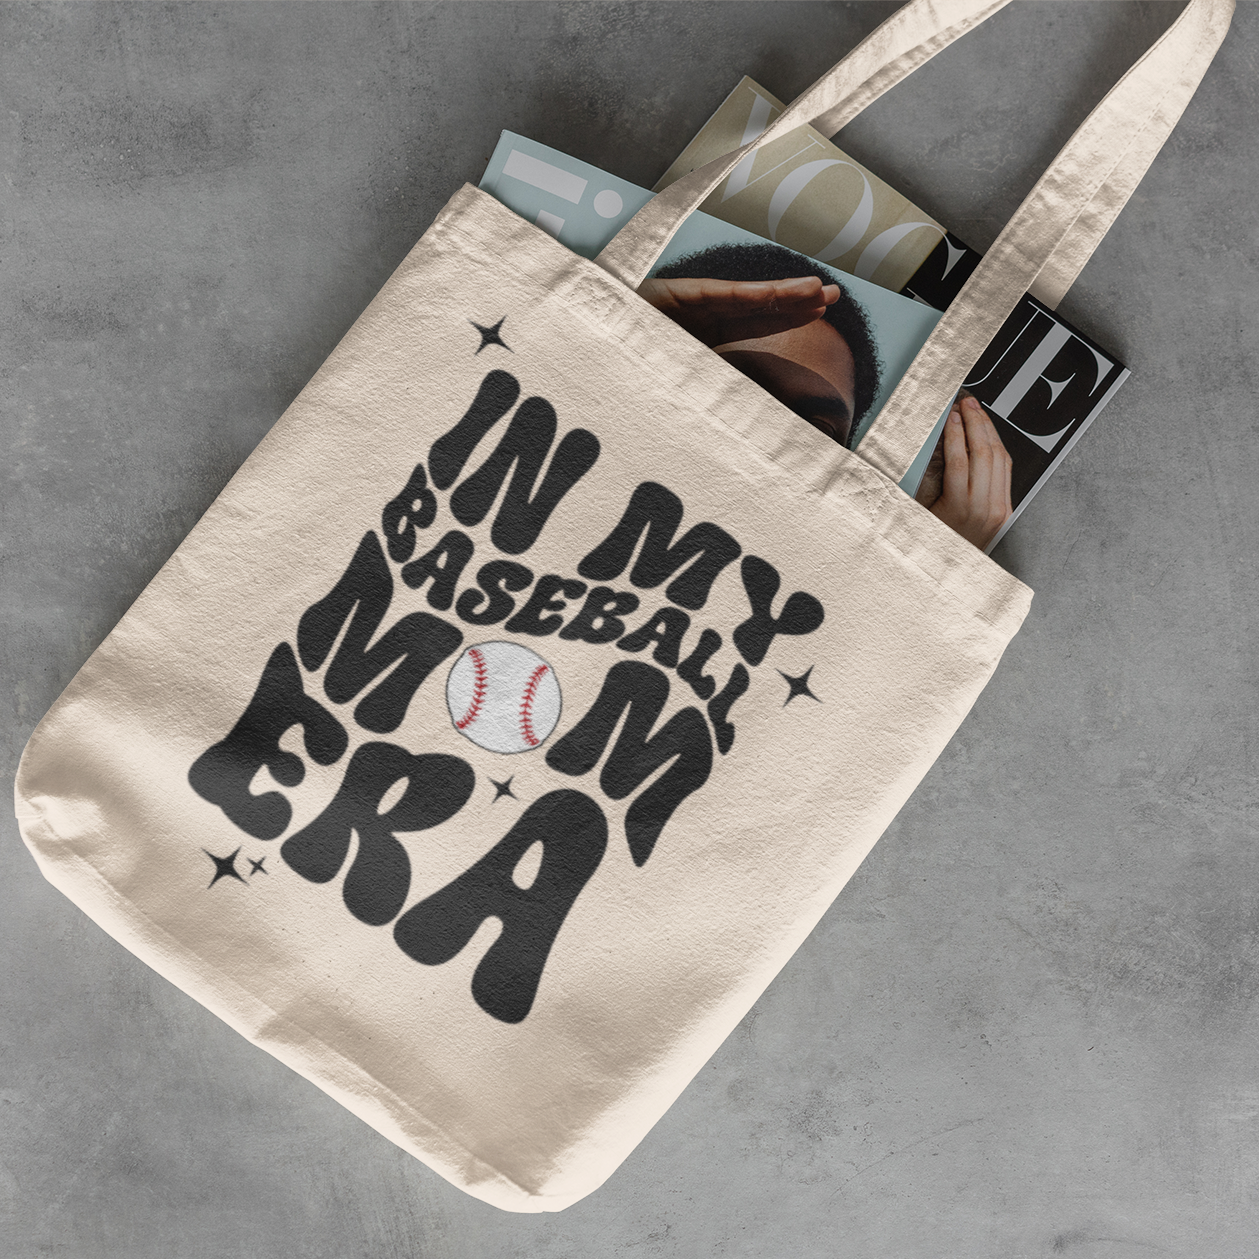 Baseball Mom Era Cotton Canvas Tote Bag - Durable & Stylish, Perfect for Game Day Essentials